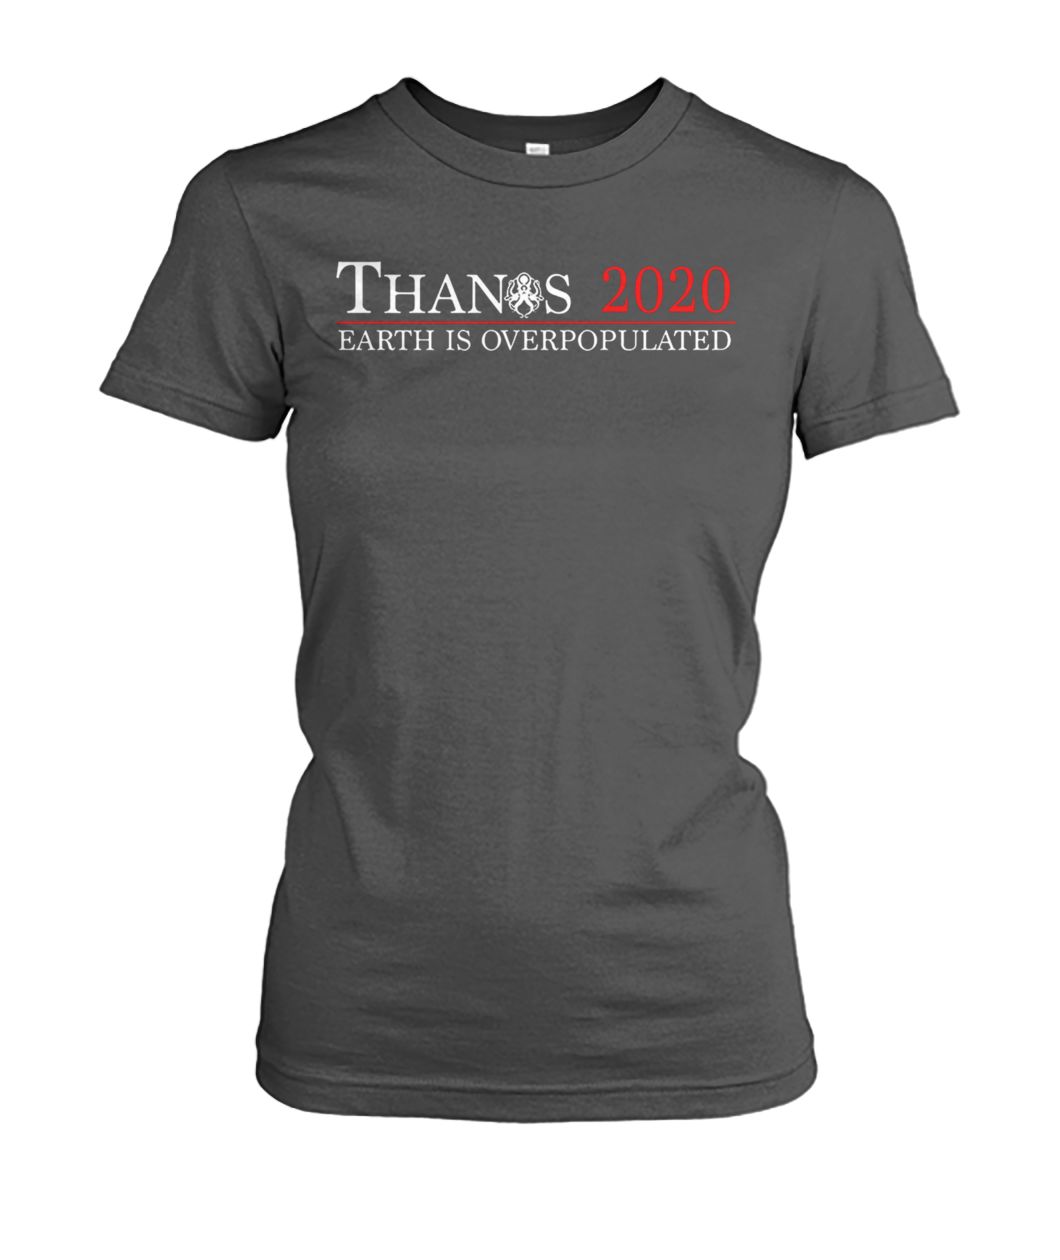 Avengers end game thanos 2020 earth is overpopulated women's crew tee